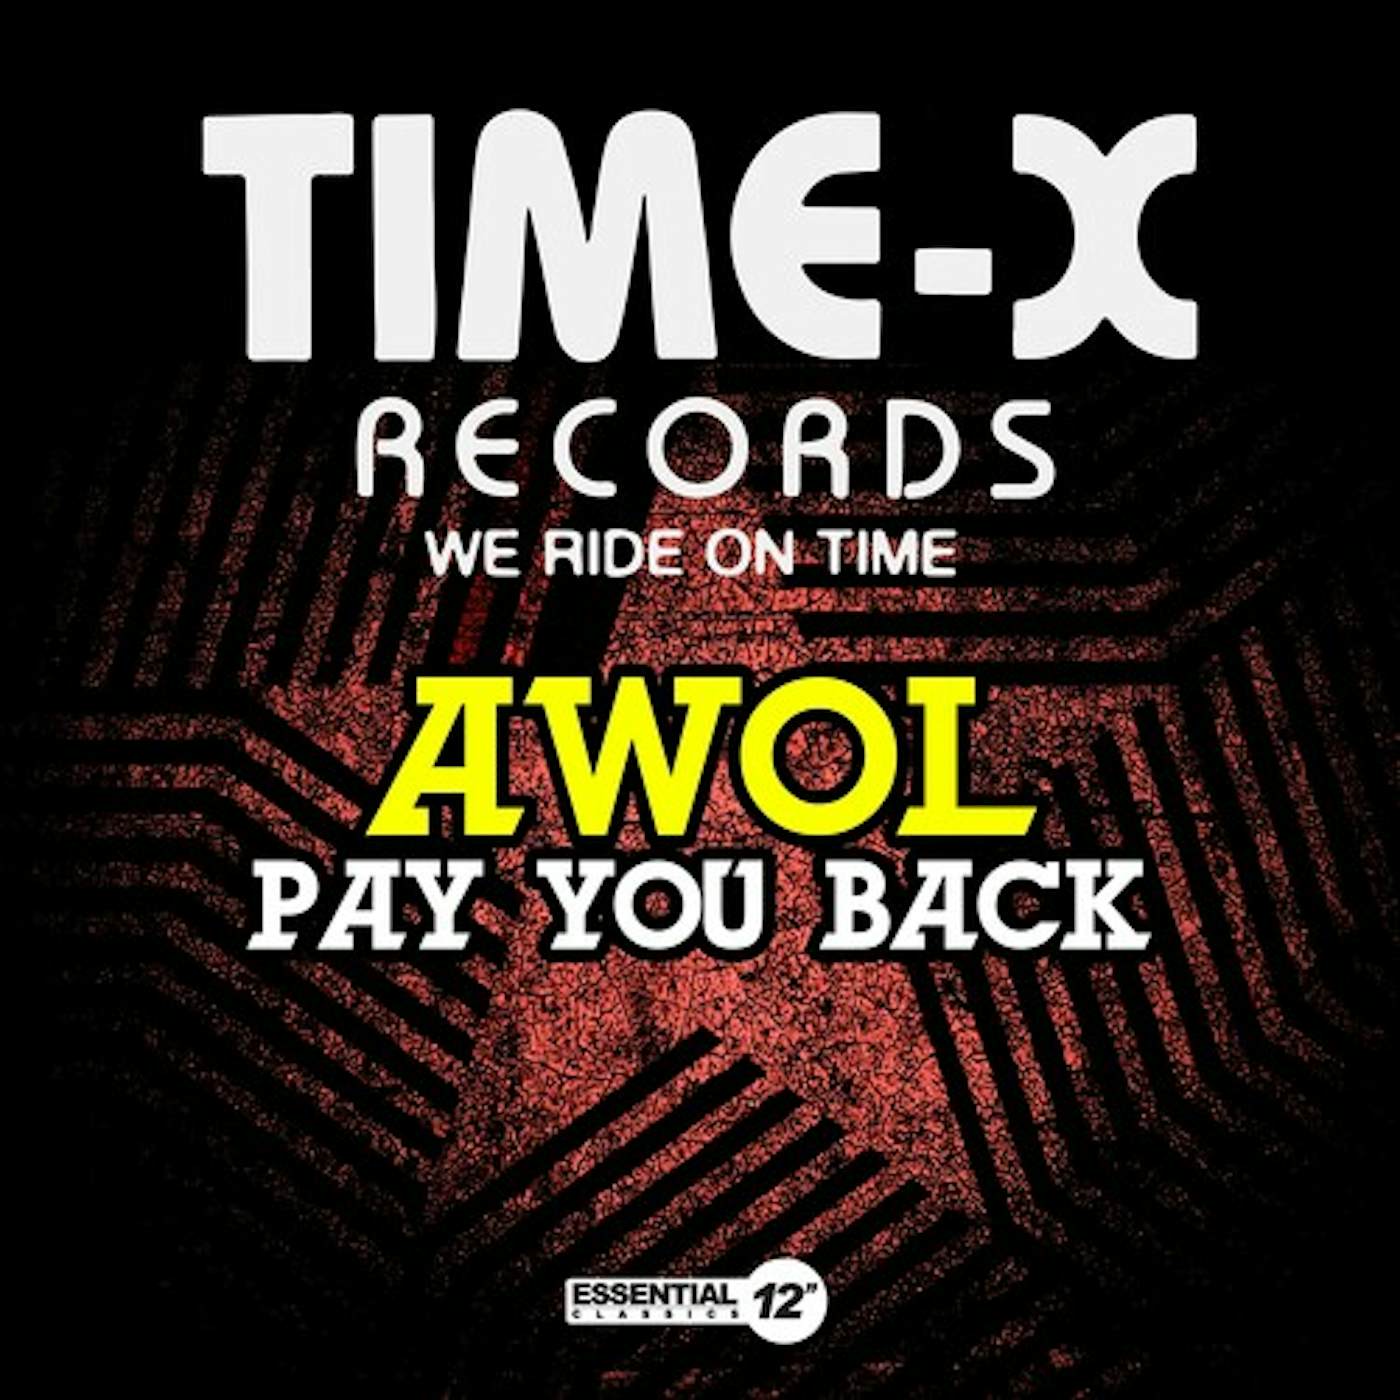 Awol PAY YOU BACK CD